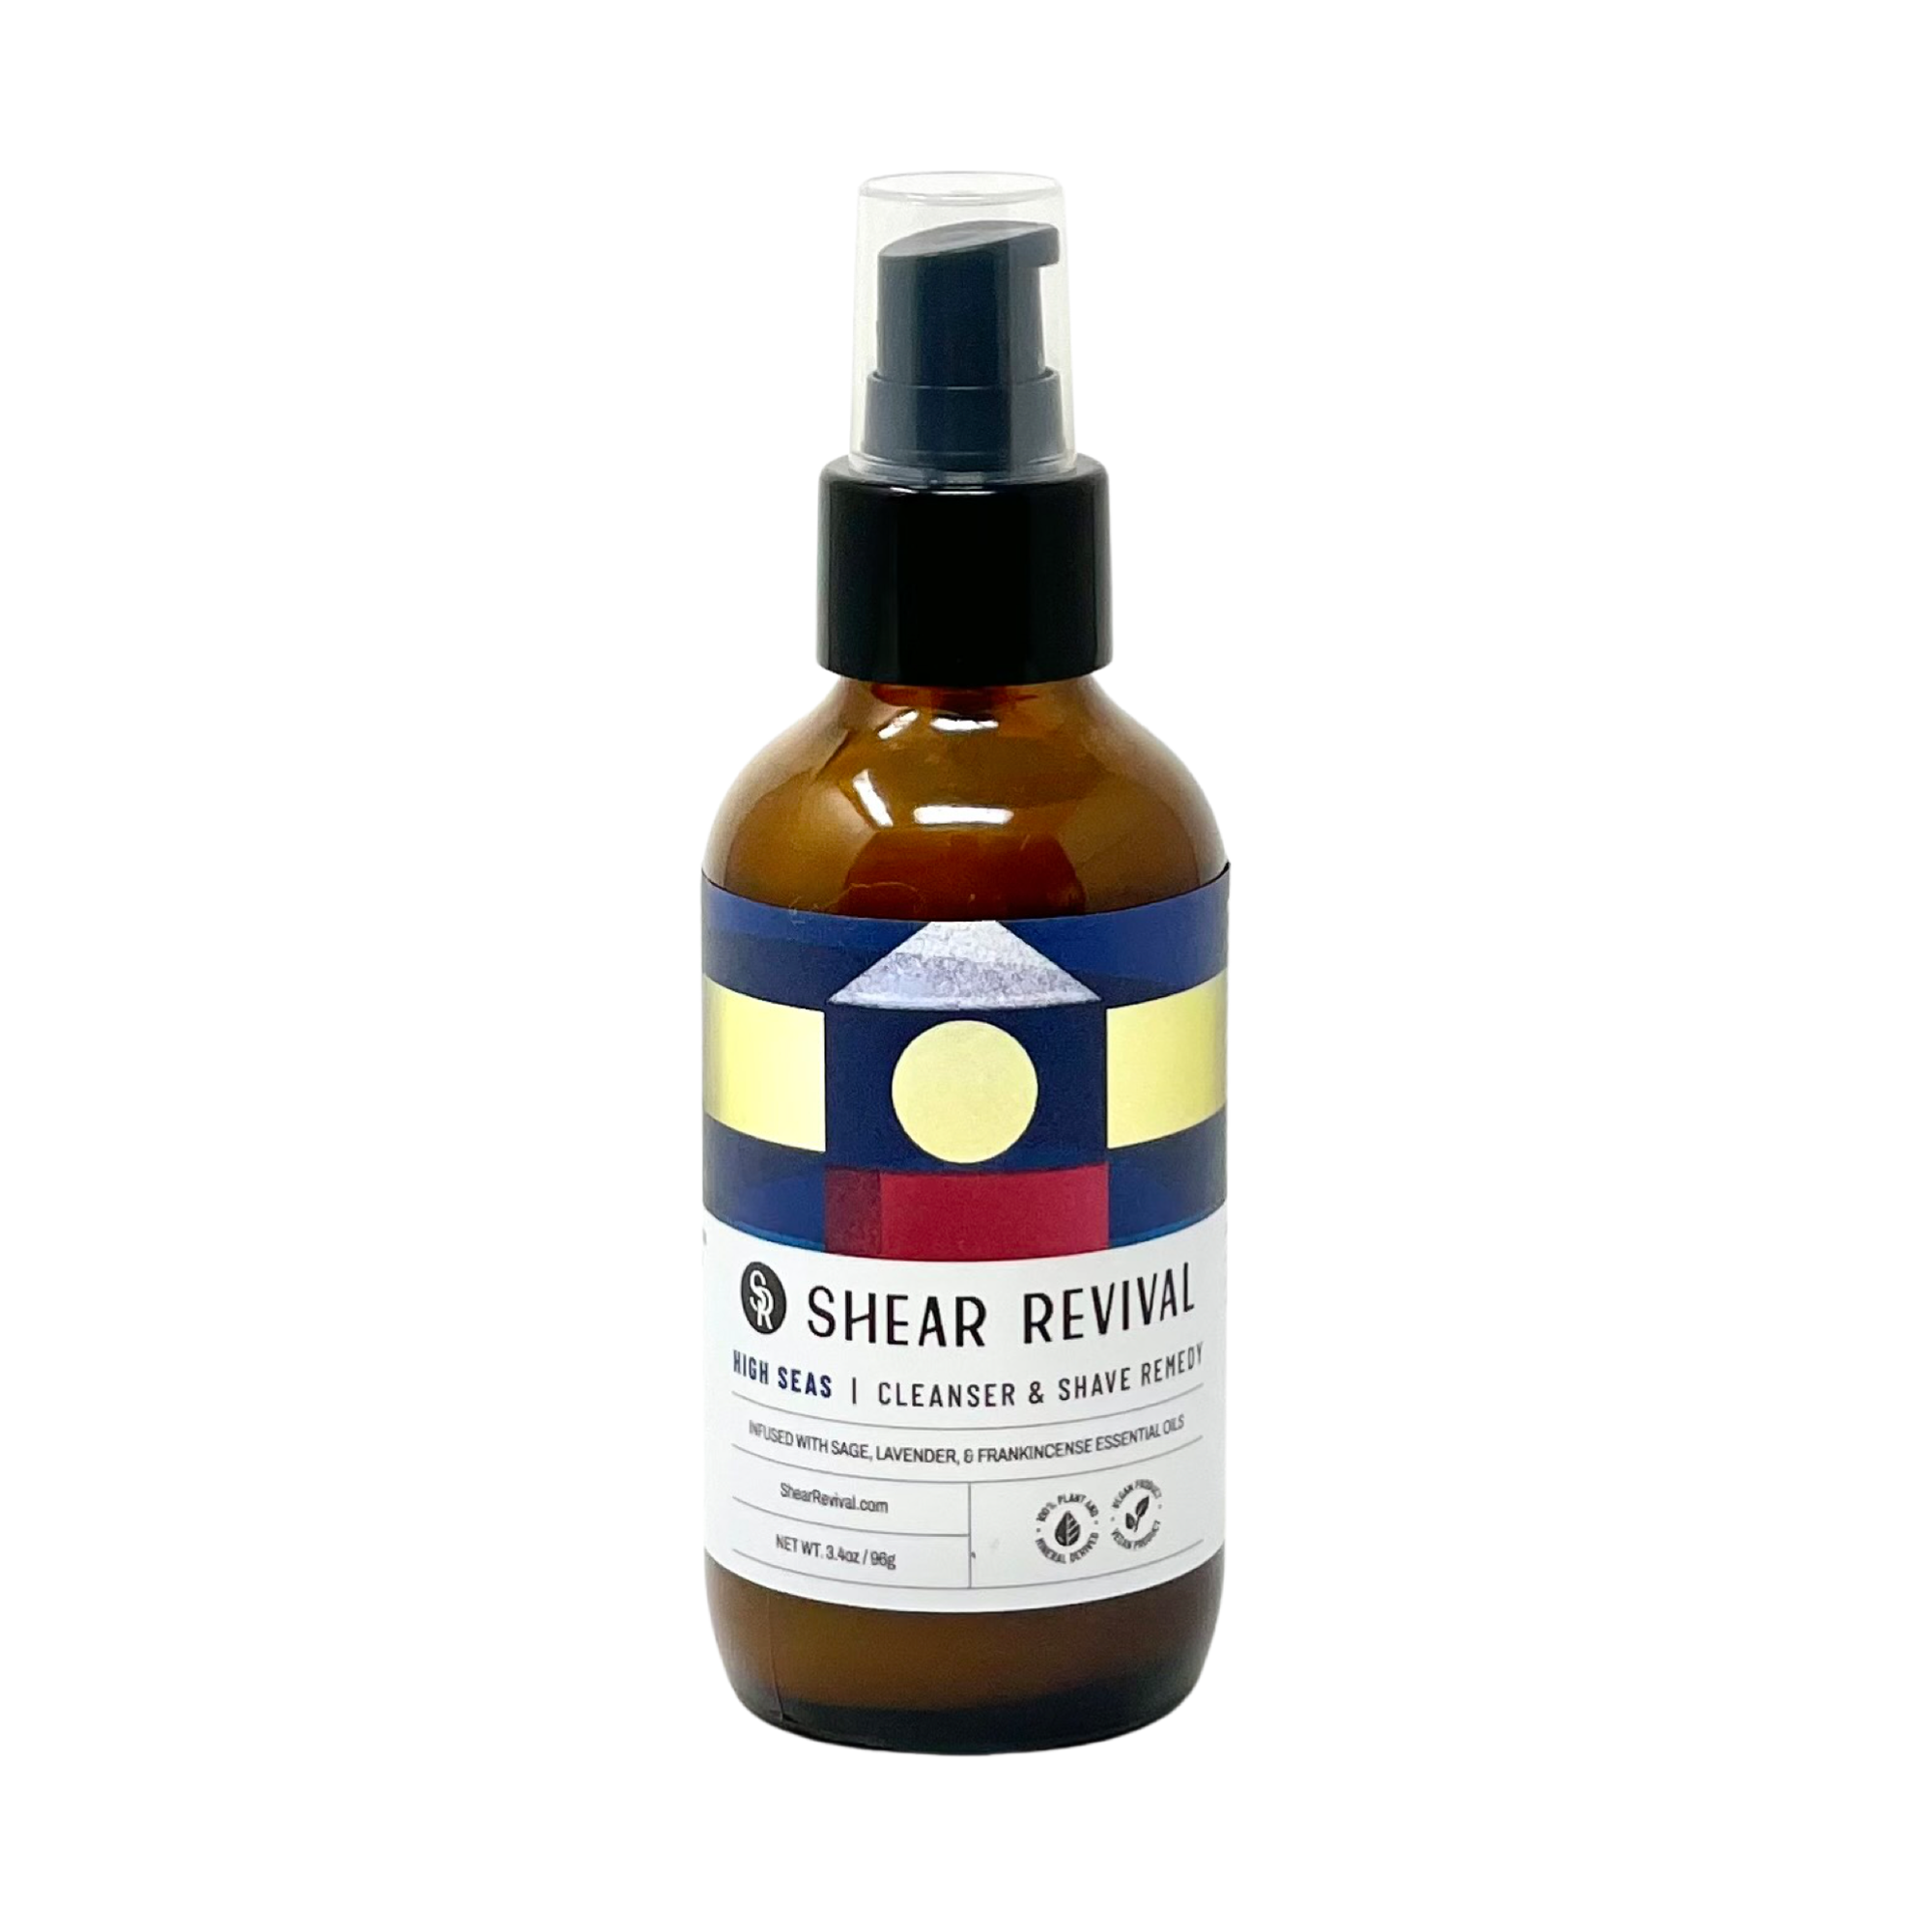 Shear Revival High Seas Cleanser + Shave Remedy